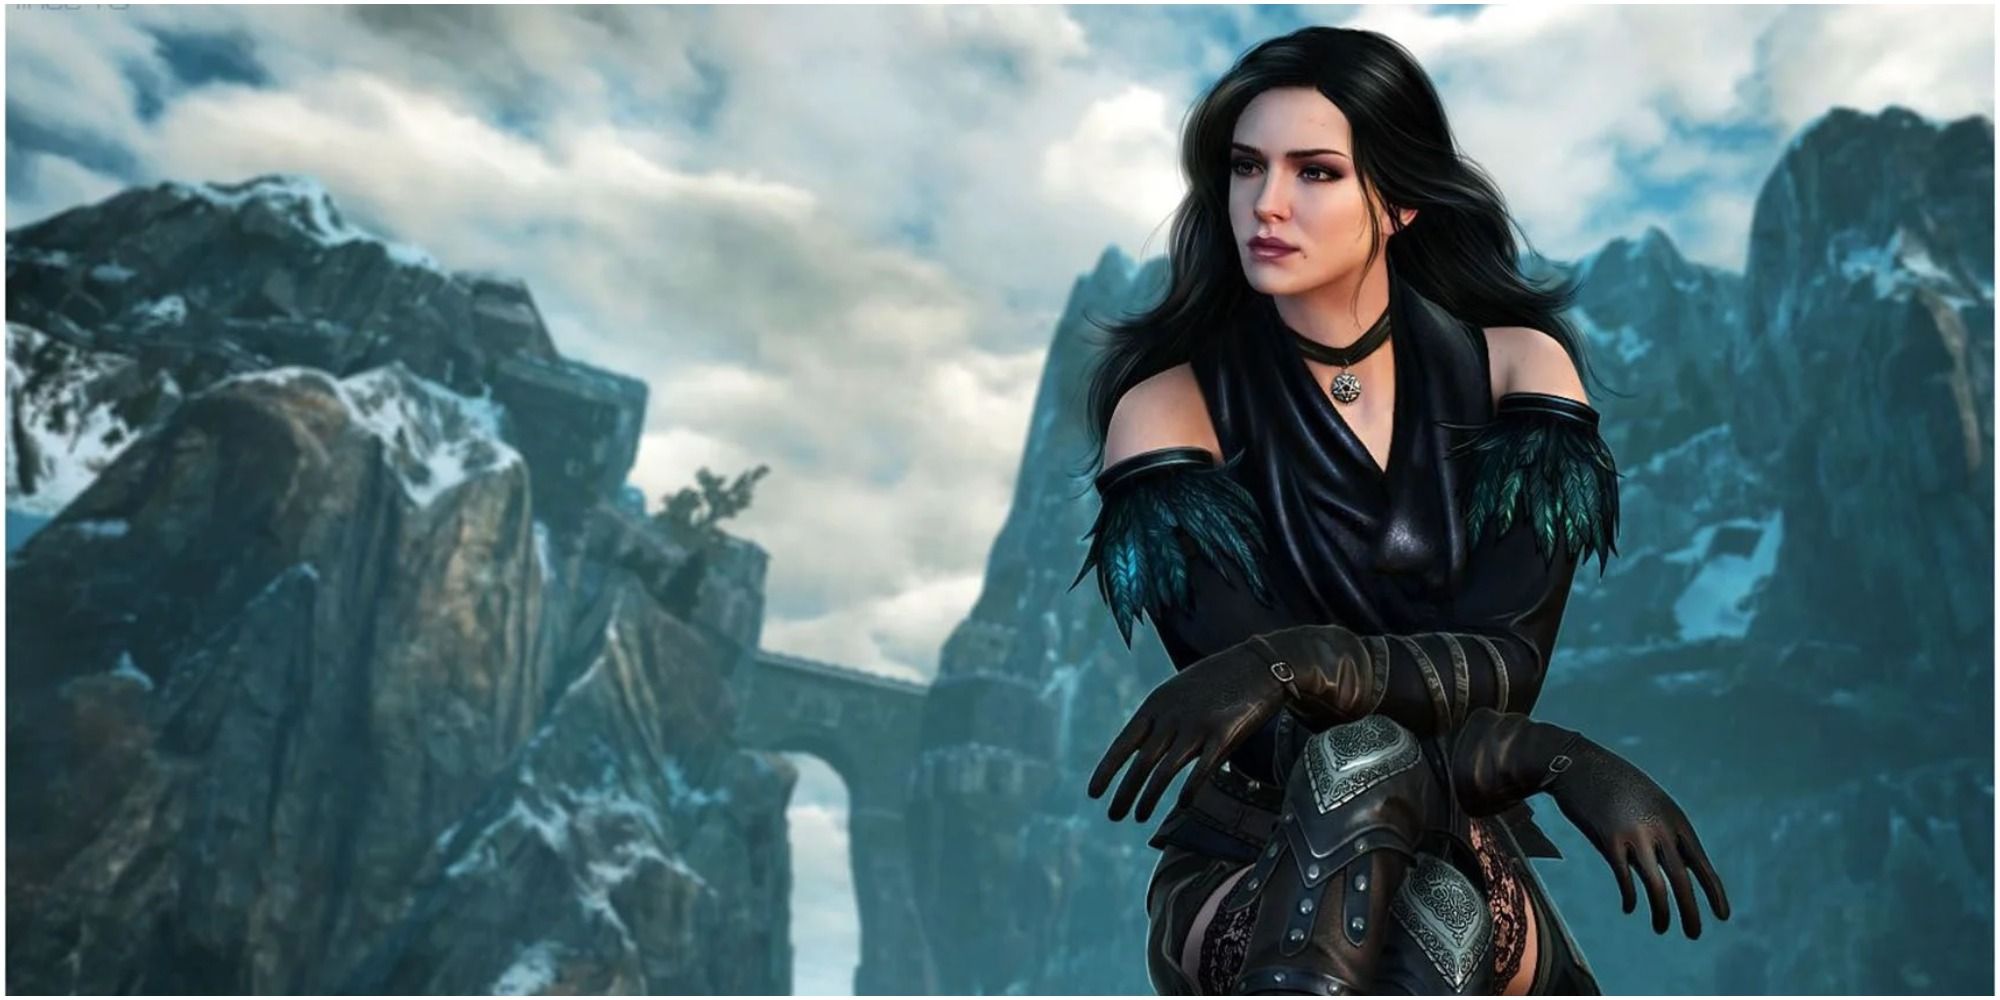 Yennefer poses in the mountains in Witcher 3